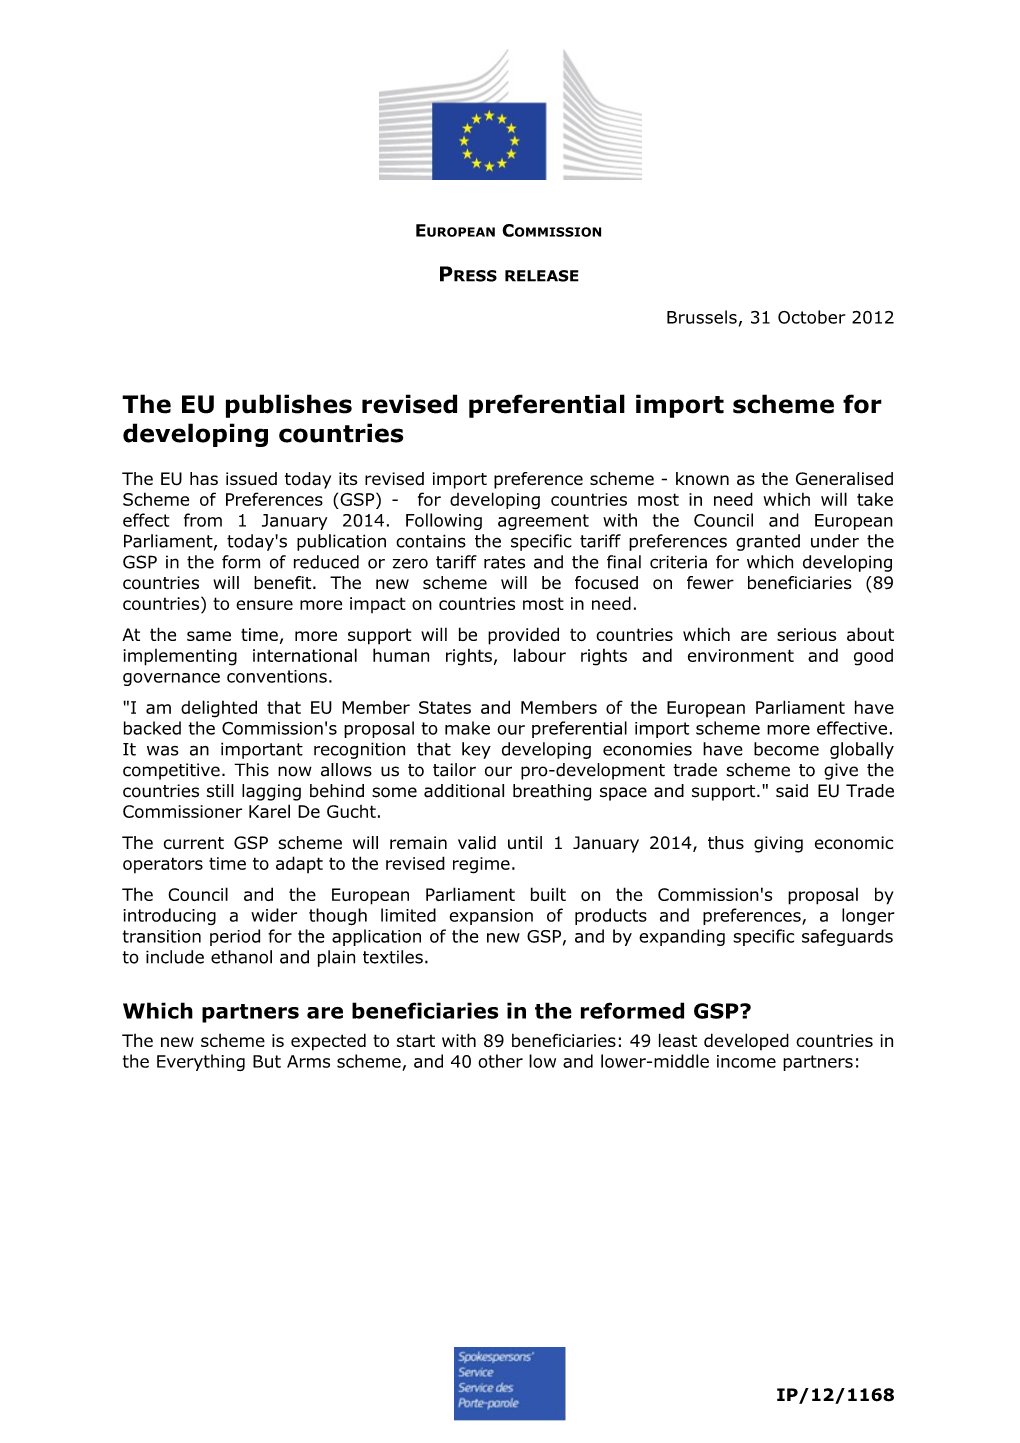 The EU Publishes Revised Preferential Import Scheme for Developing Countries